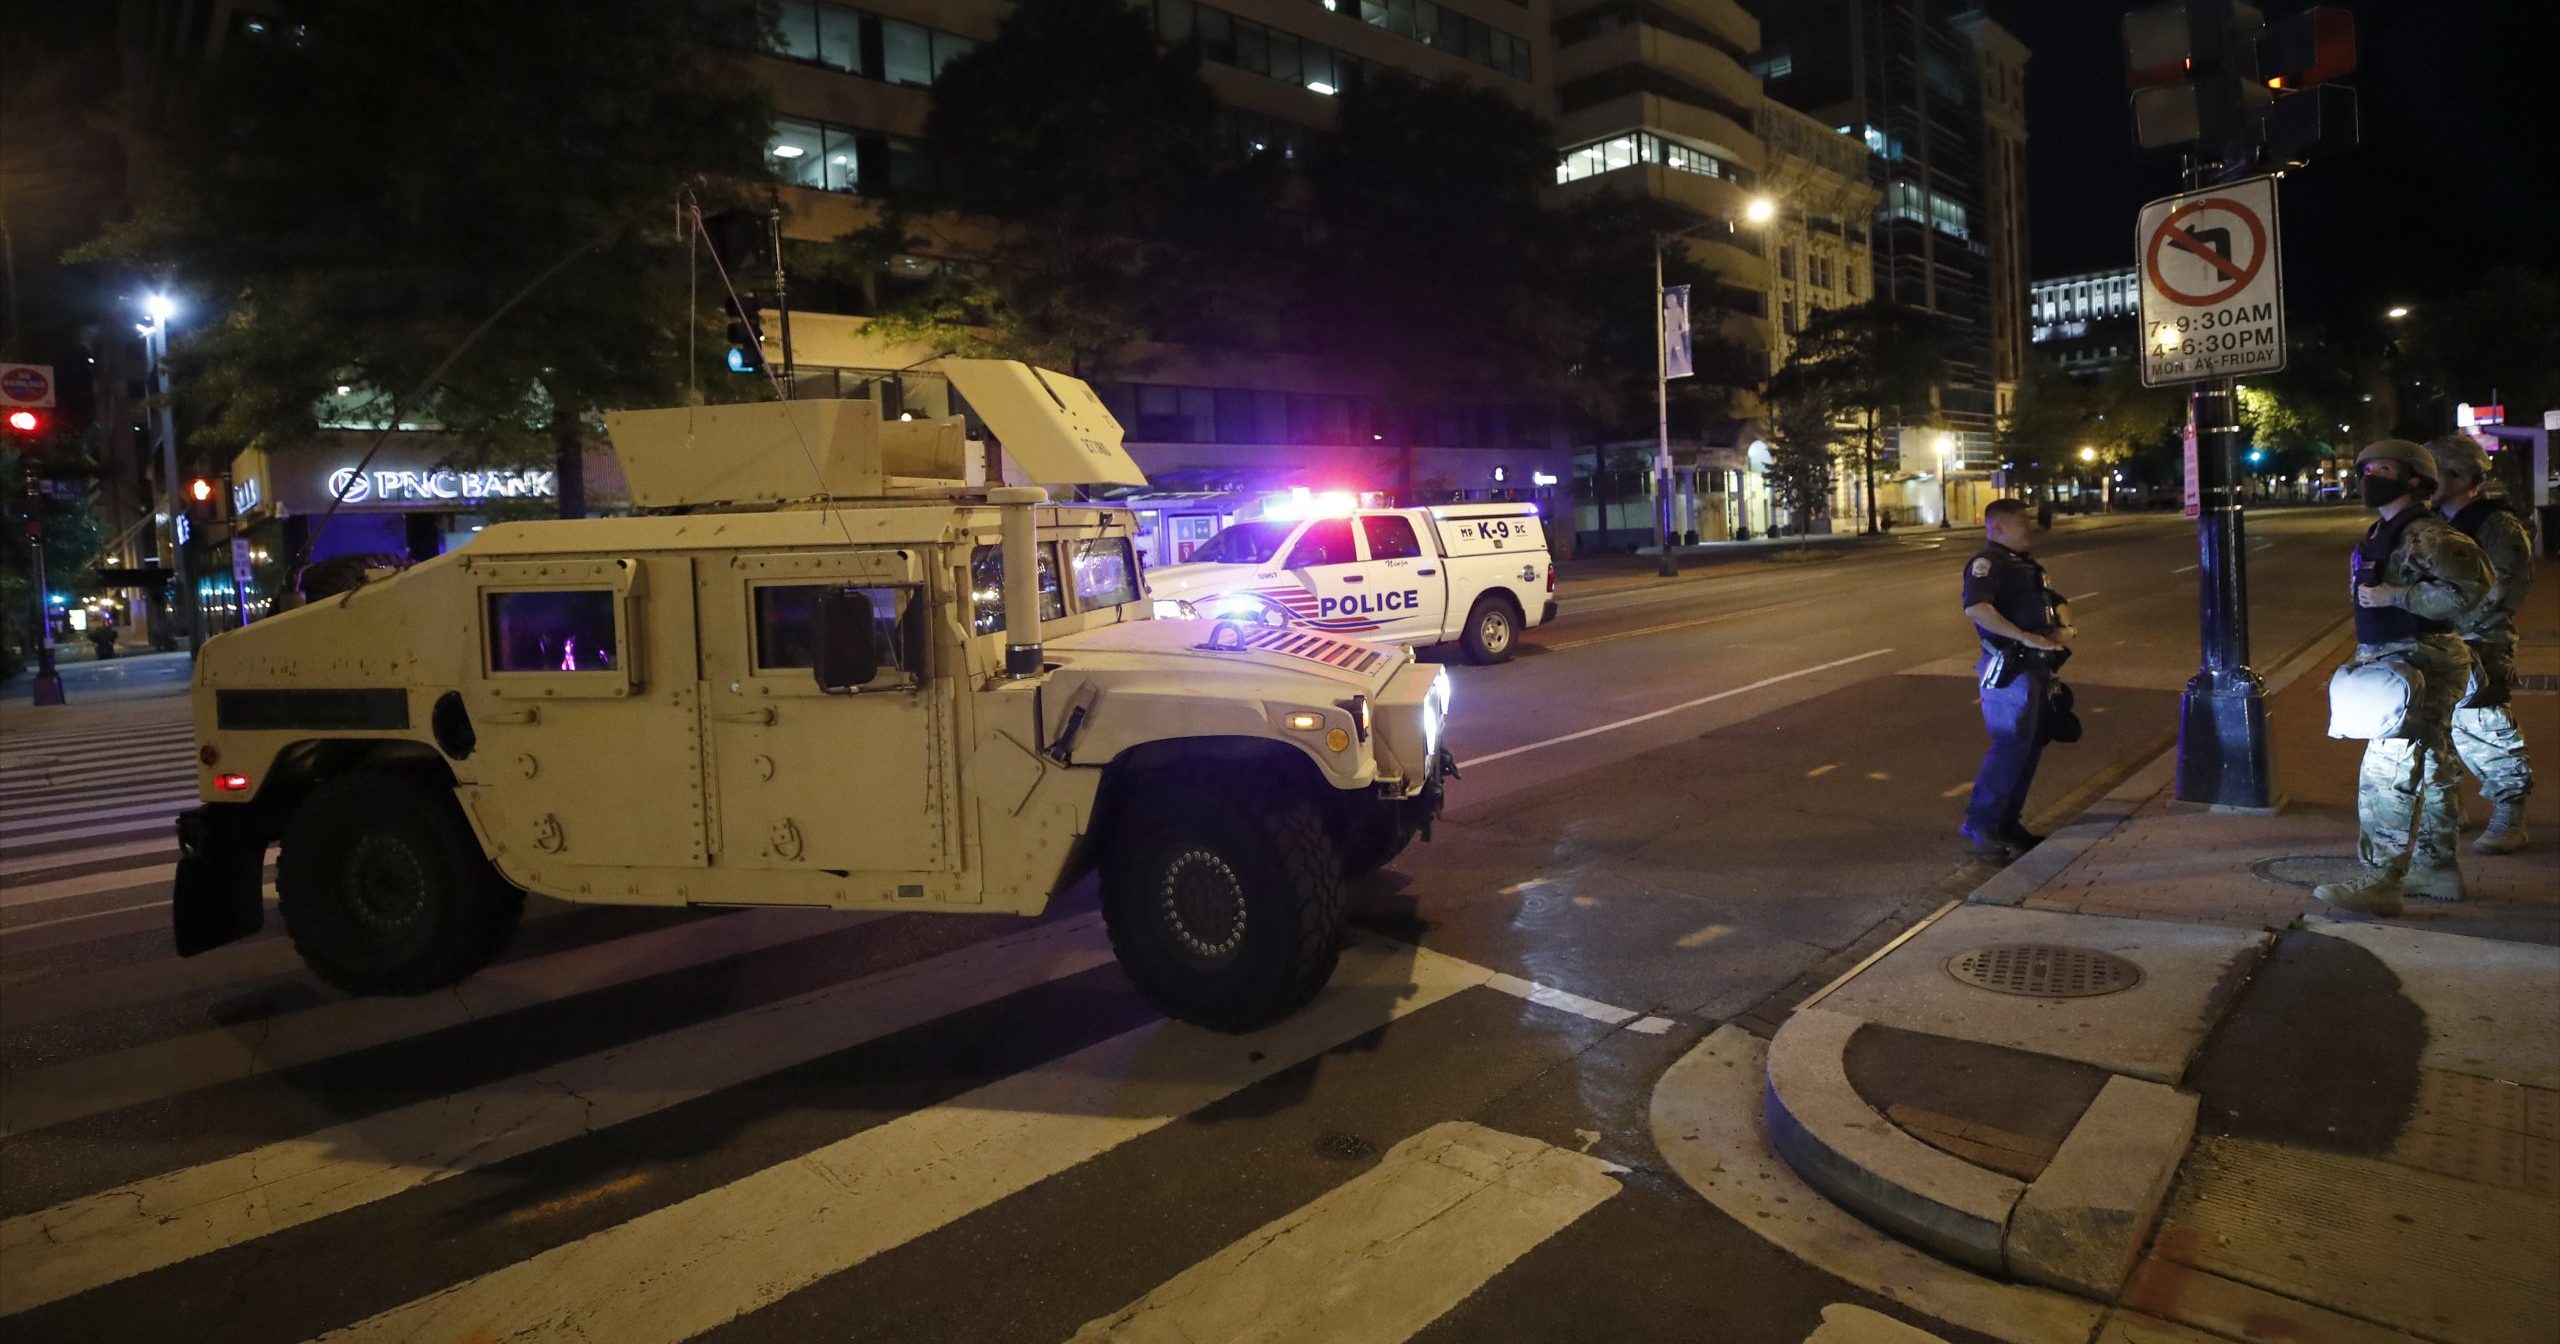 A military Humvee blocks an intersection along K Street in downtown Washington, D.C. as demonstrators protest the death of George Floyd on Monday, June 1, 2020. Floyd died after being restrained by Minneapolis police officers.